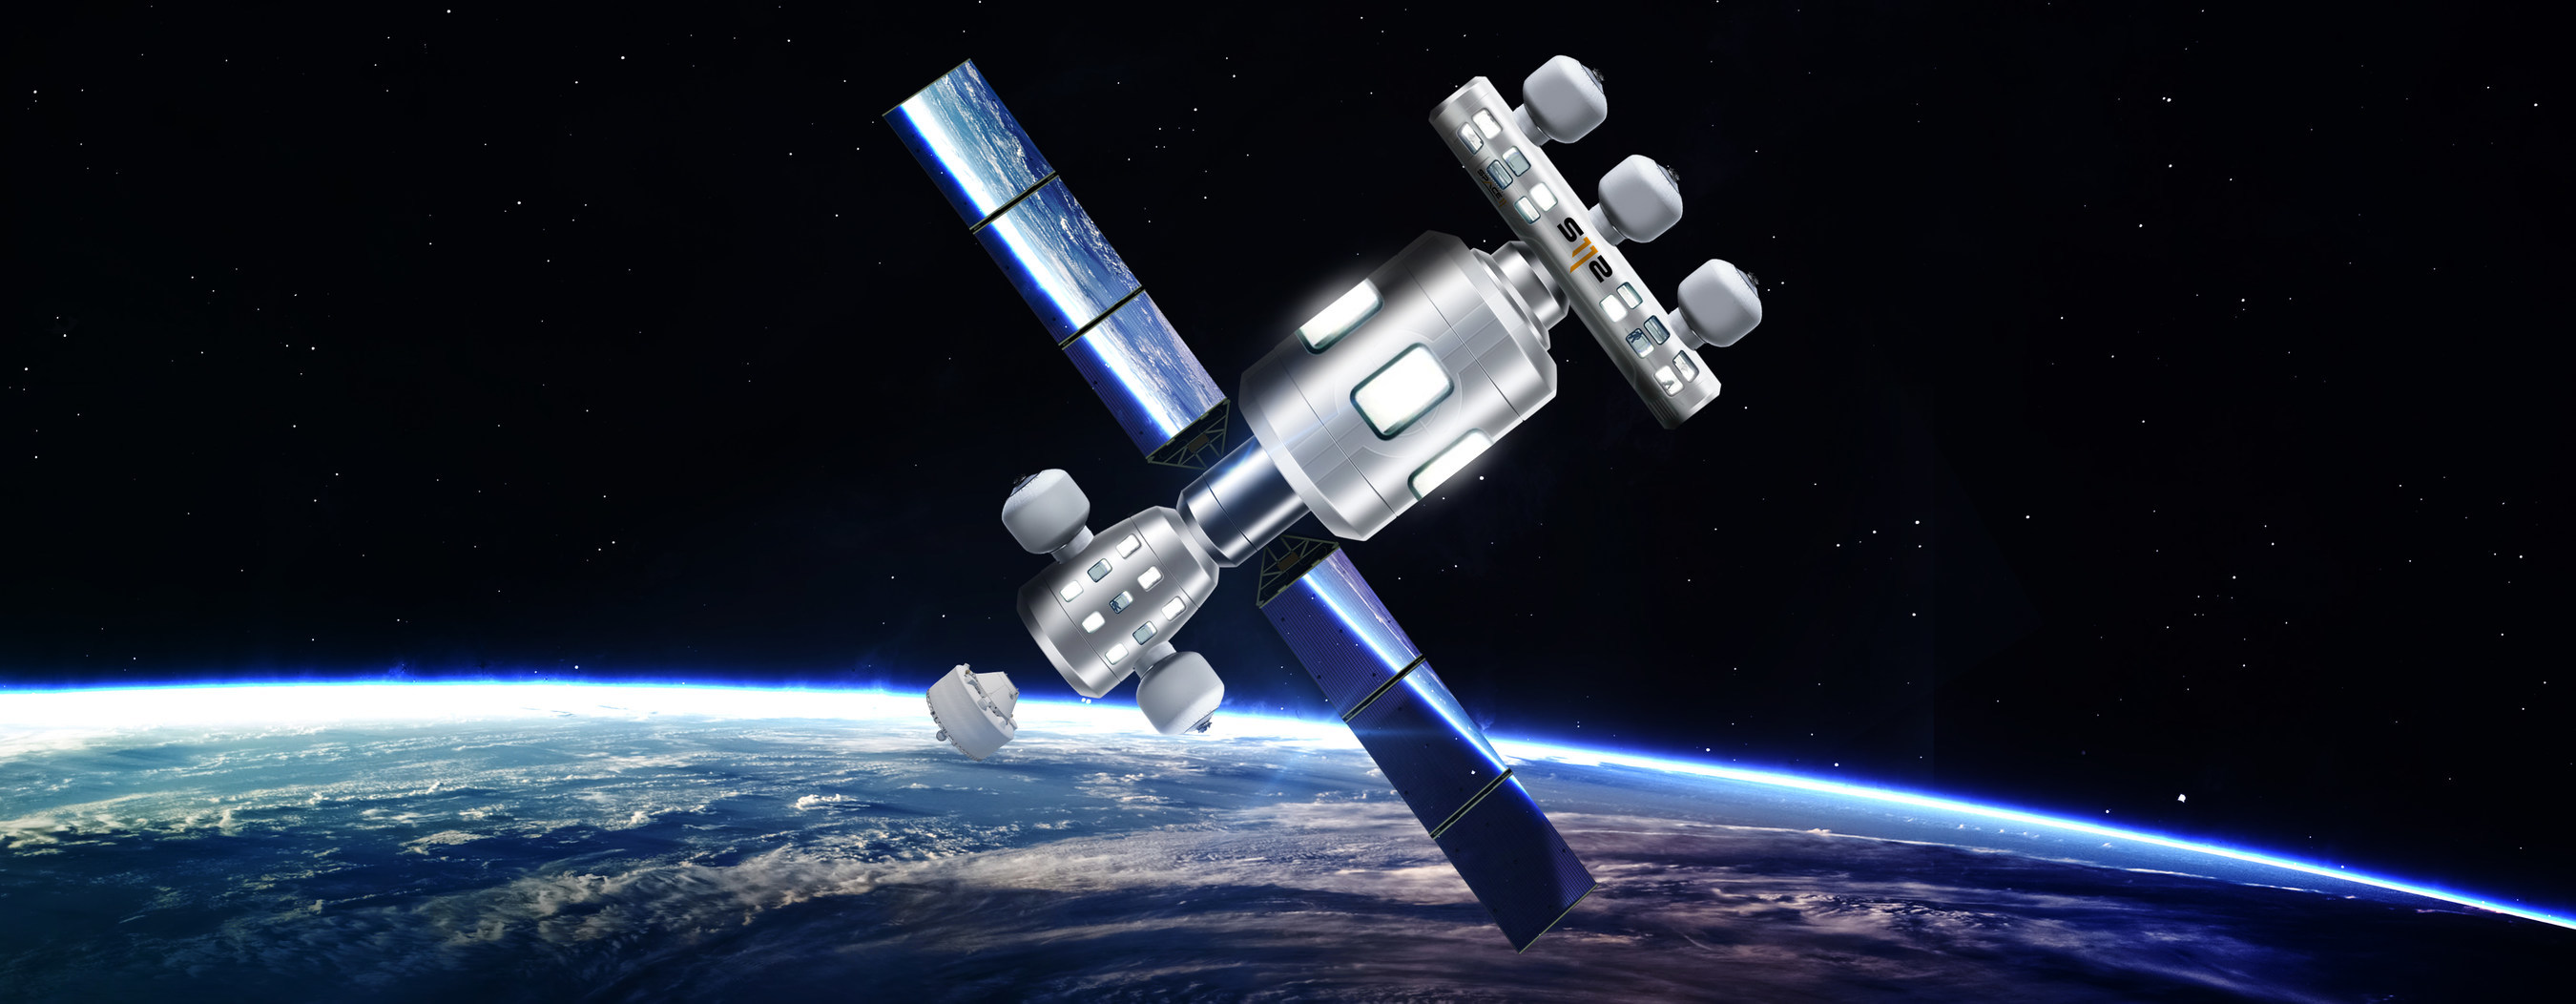 Space_11_space_station_concept.jpg